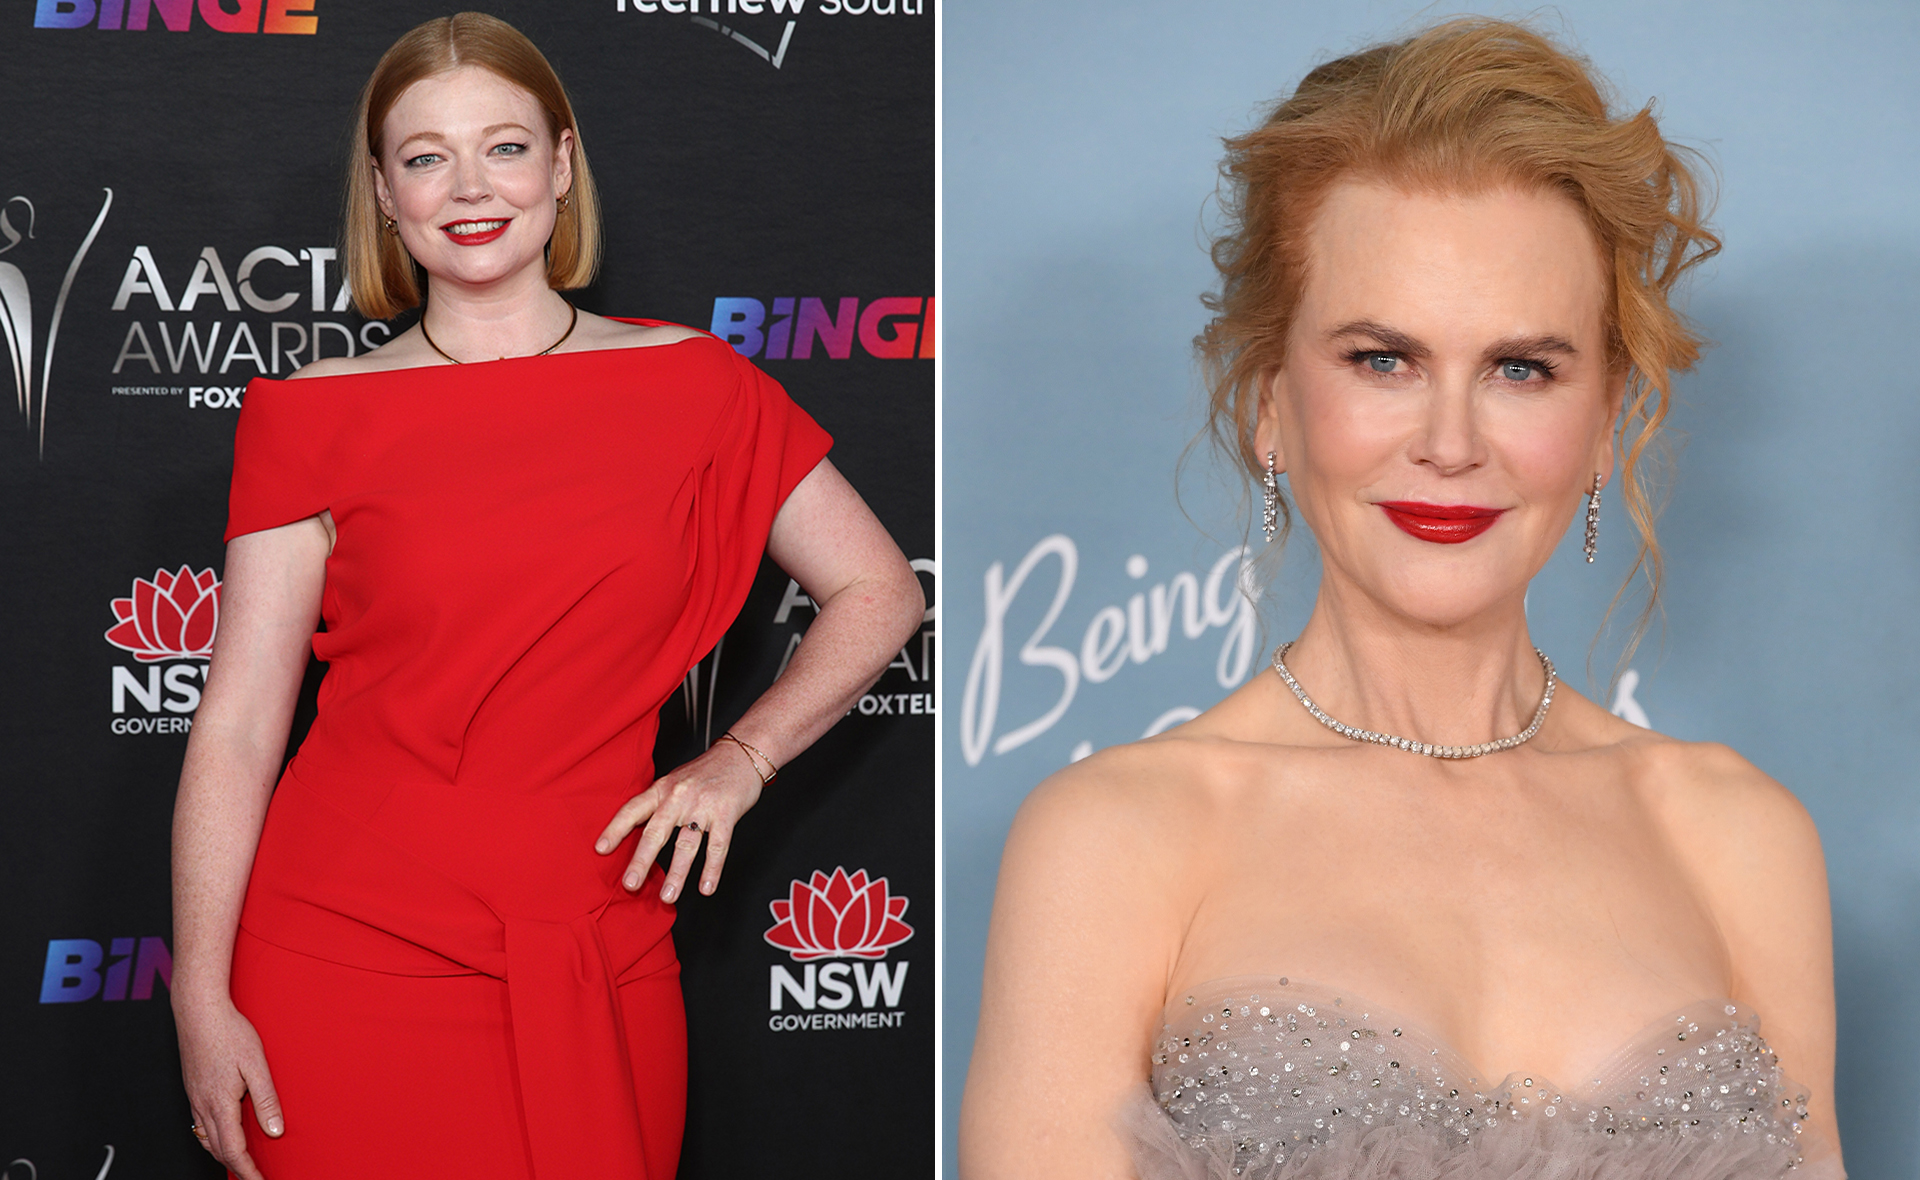 Nicole Kidman and Sarah Snook are among the Aussie stars to receive Golden Globe nominations